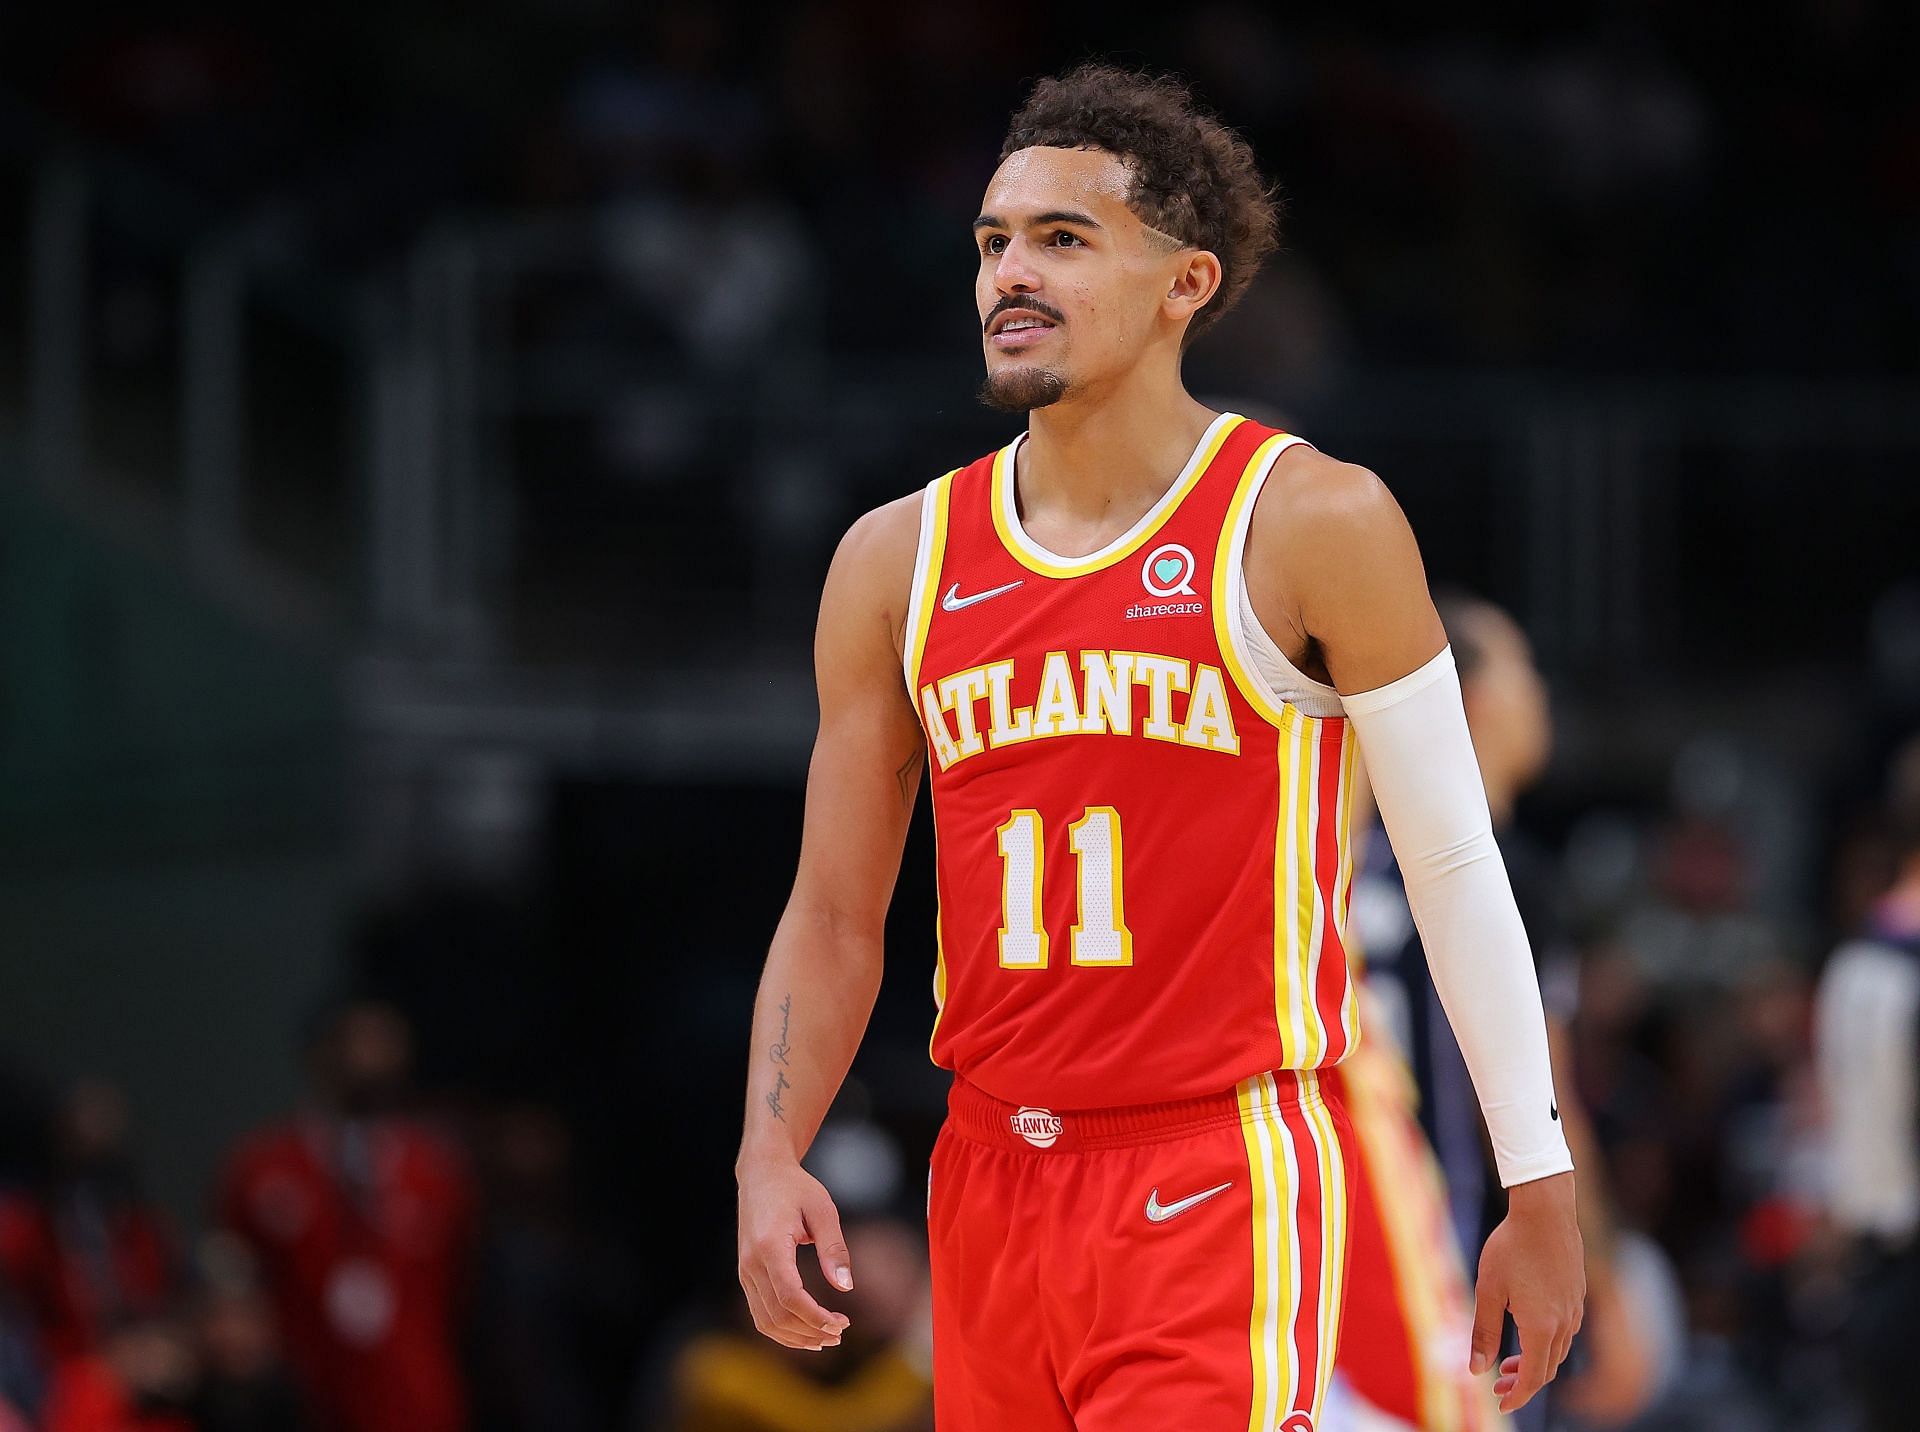 Trae Young #11 of the Atlanta Hawks reacts against the Orlando Magic during the second half at State Farm Arena on November 15, 2021 in Atlanta, Georgia.